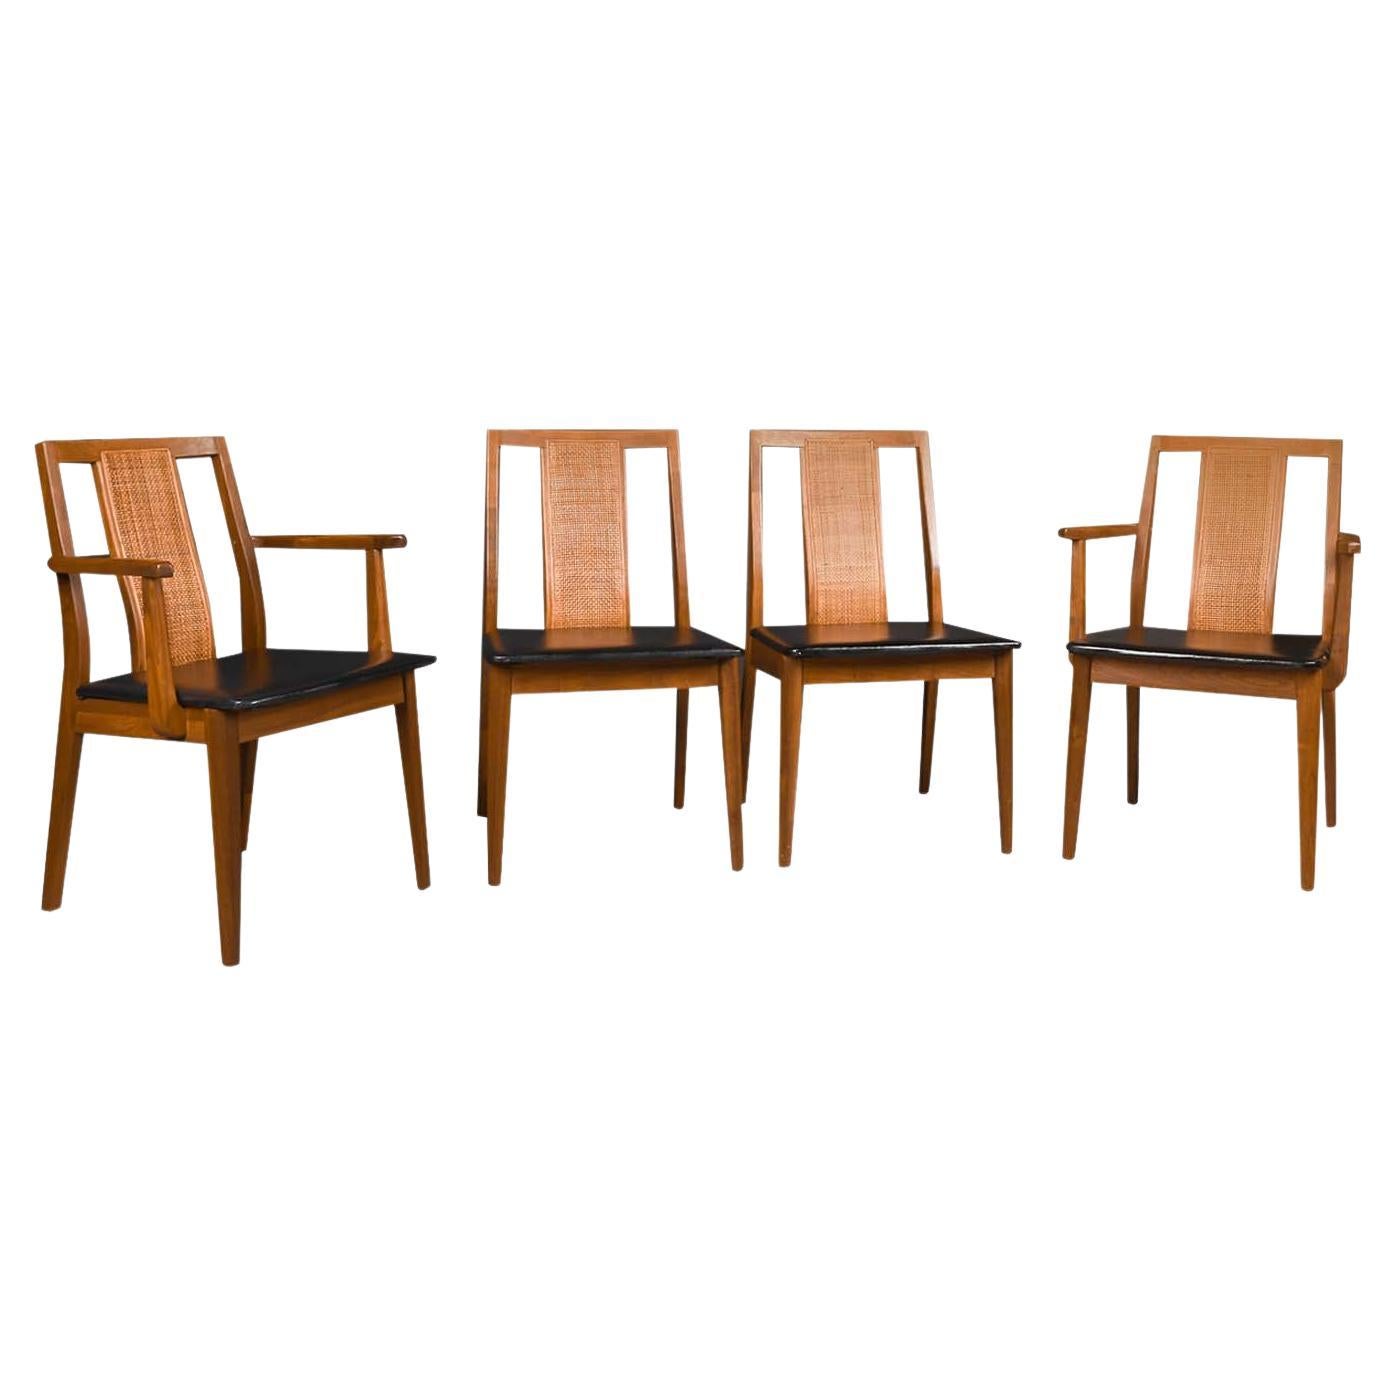 Four Midcentury Chairs in the Style of Edward Wormley